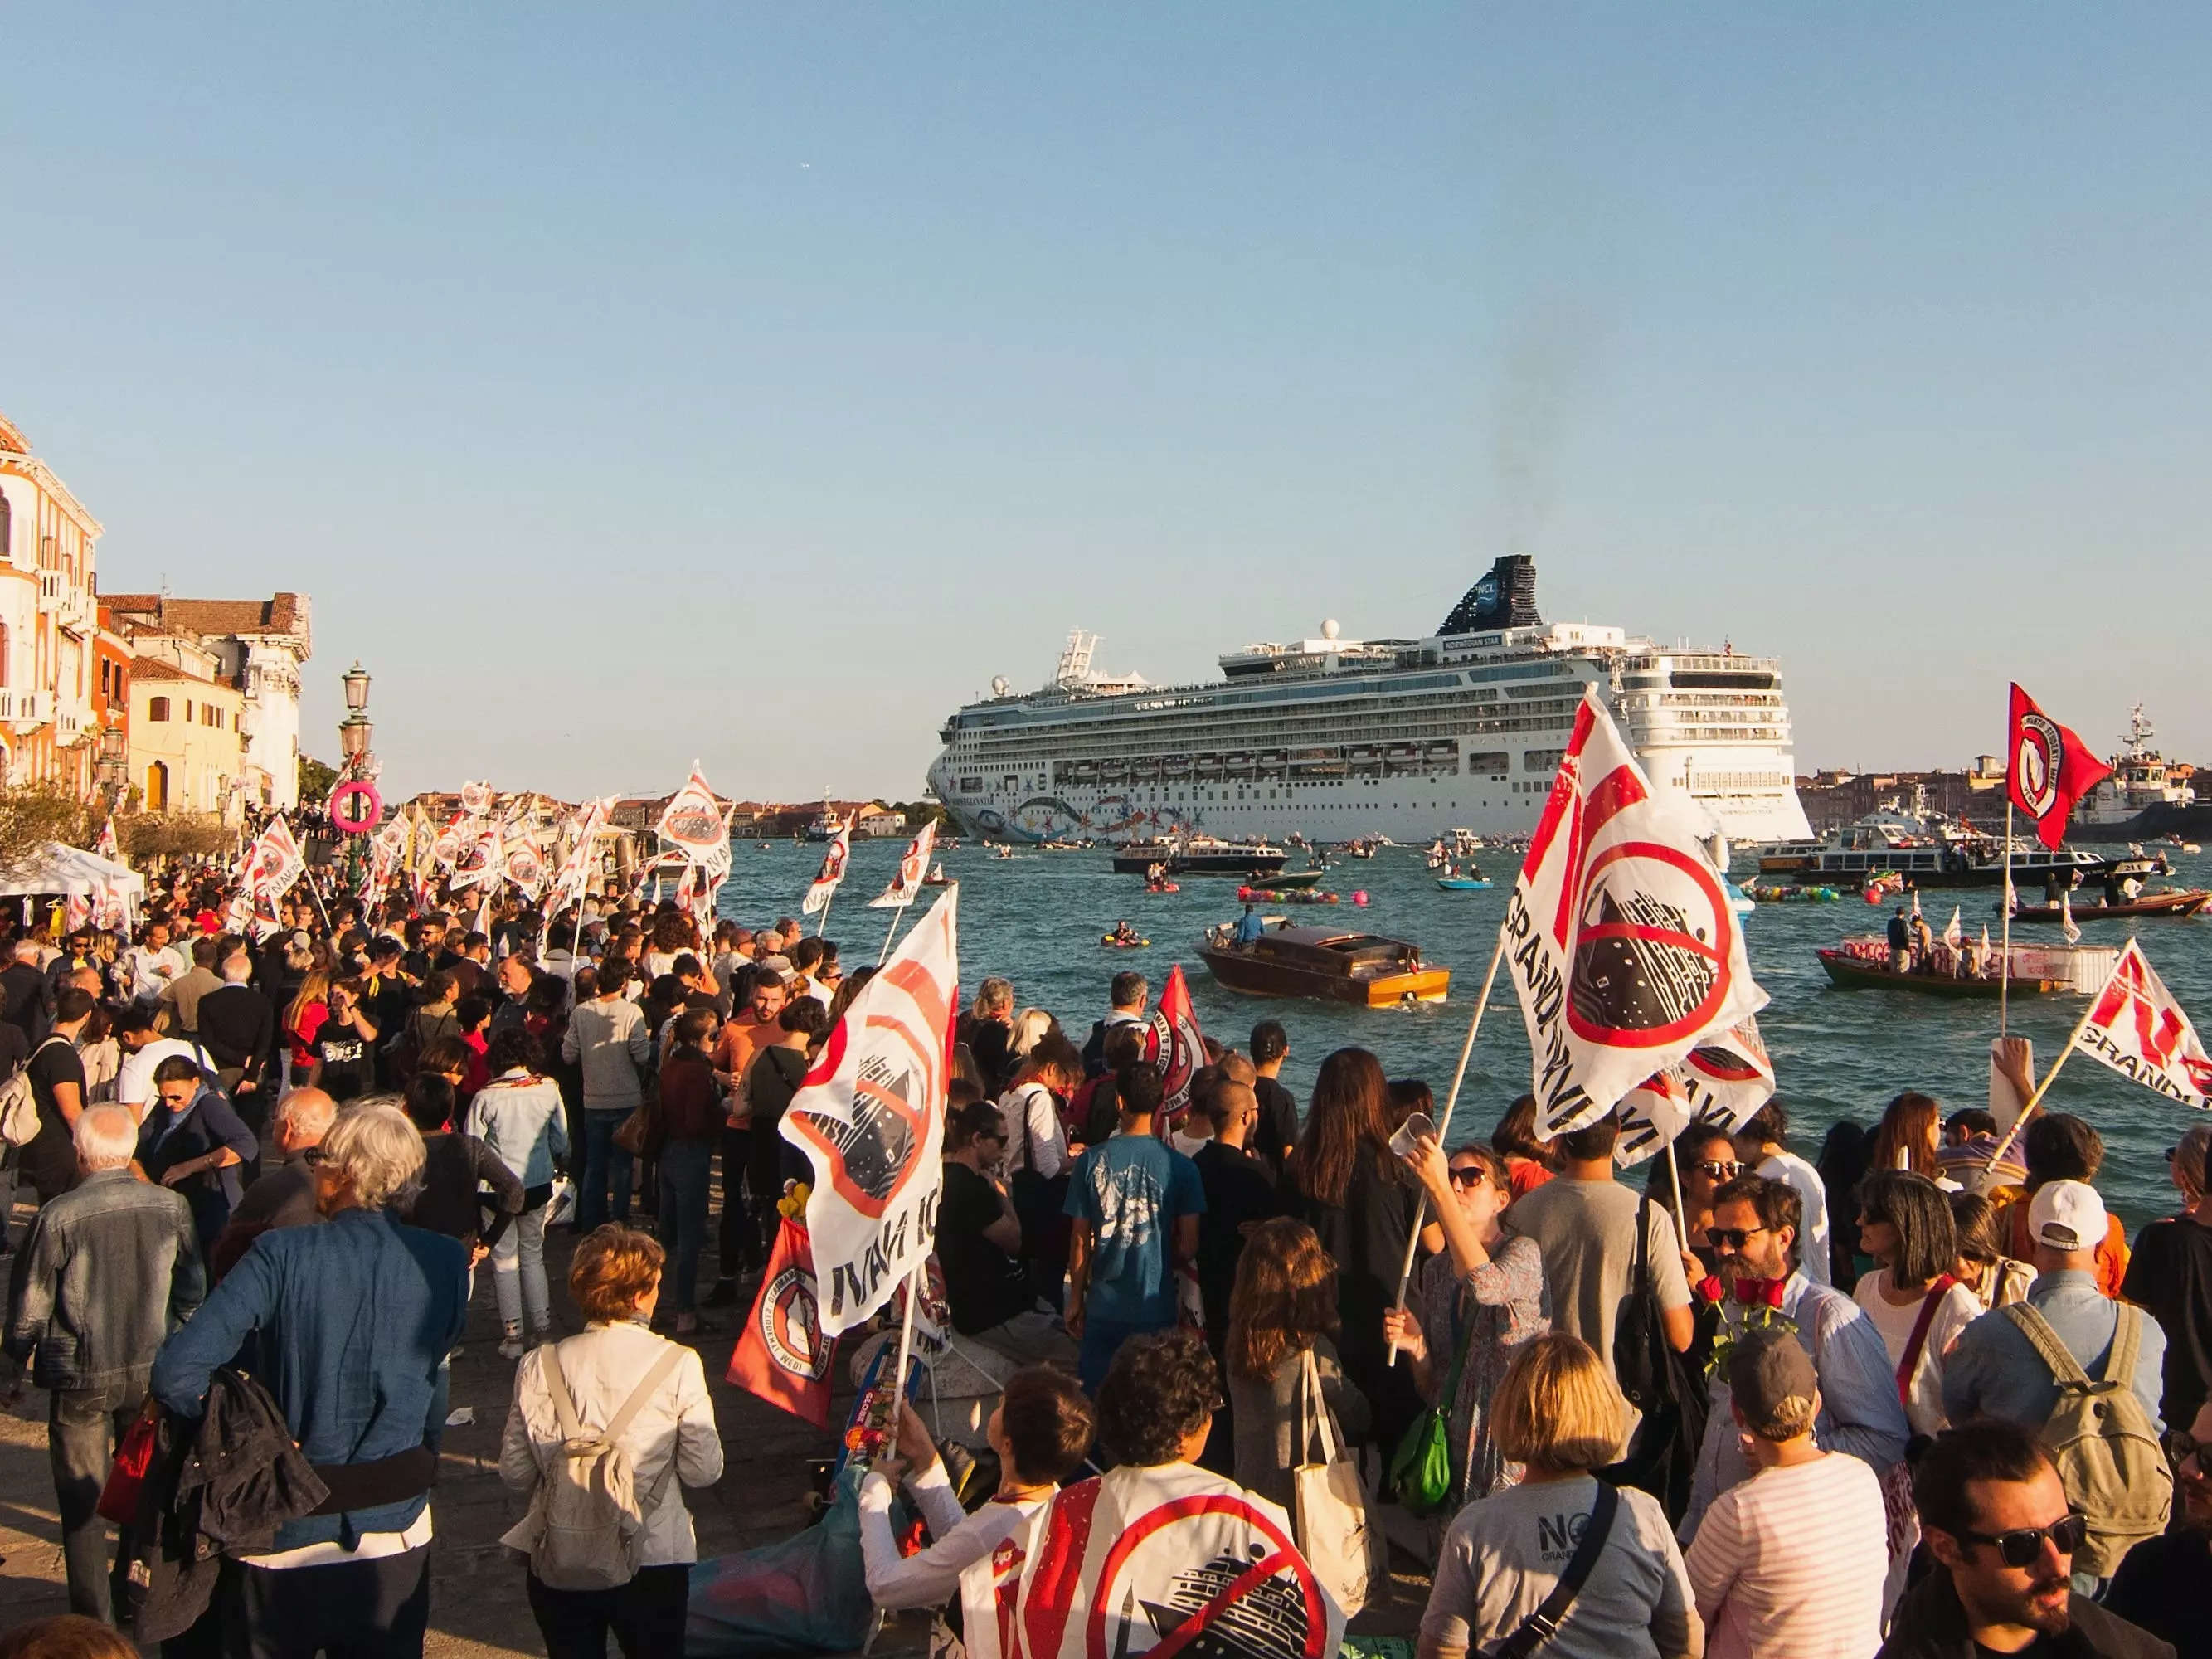 Protesters on small boats demonstrate in the Giudecca canal ahead of the passage of a cruise ship on September 30, 2018 in Venice, Italy.